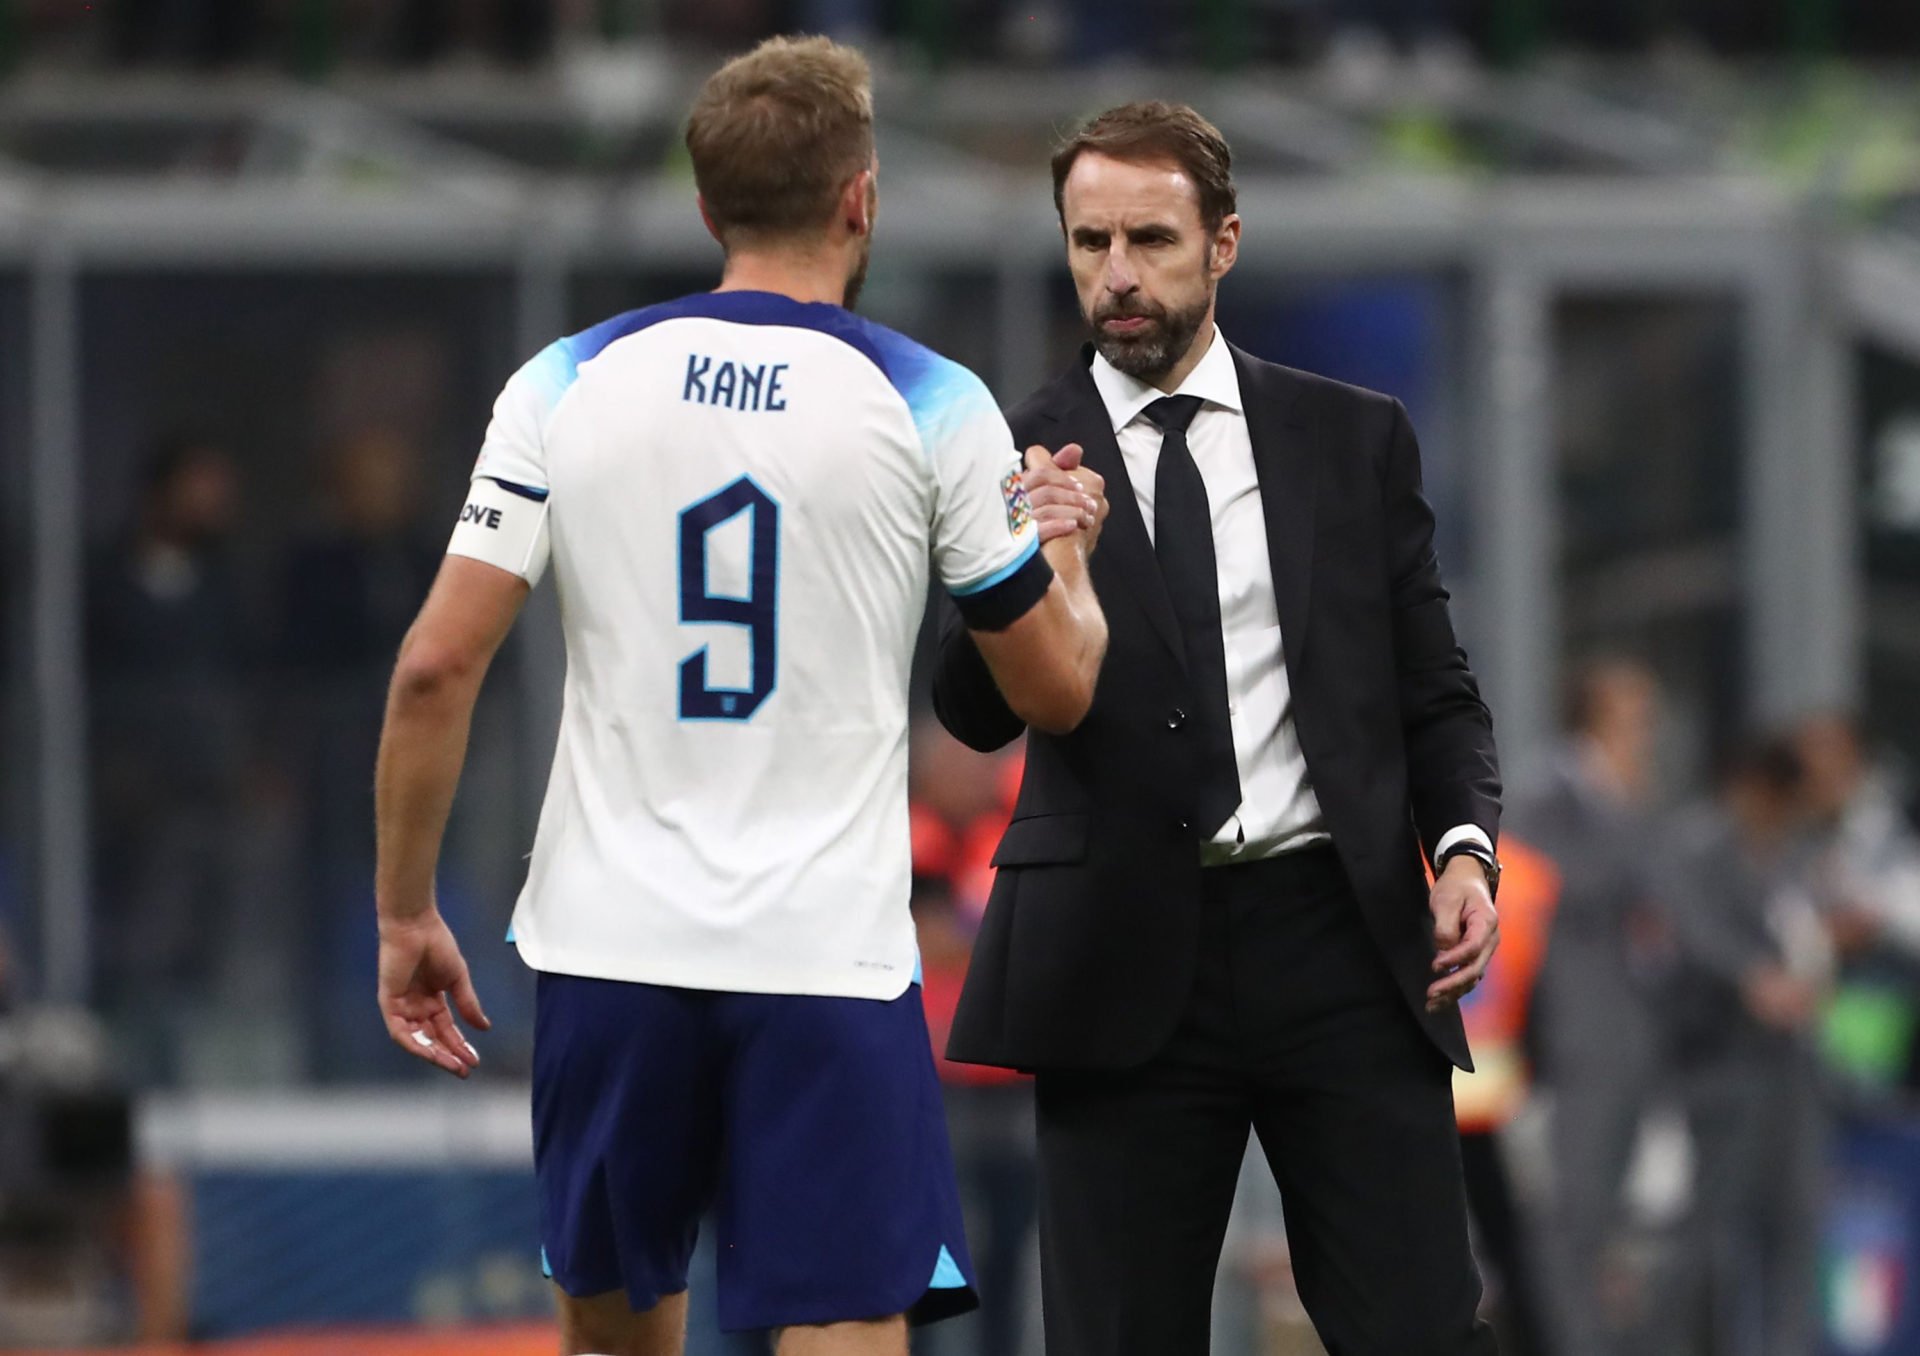 Italy vs England kick-off time, date and TV channel